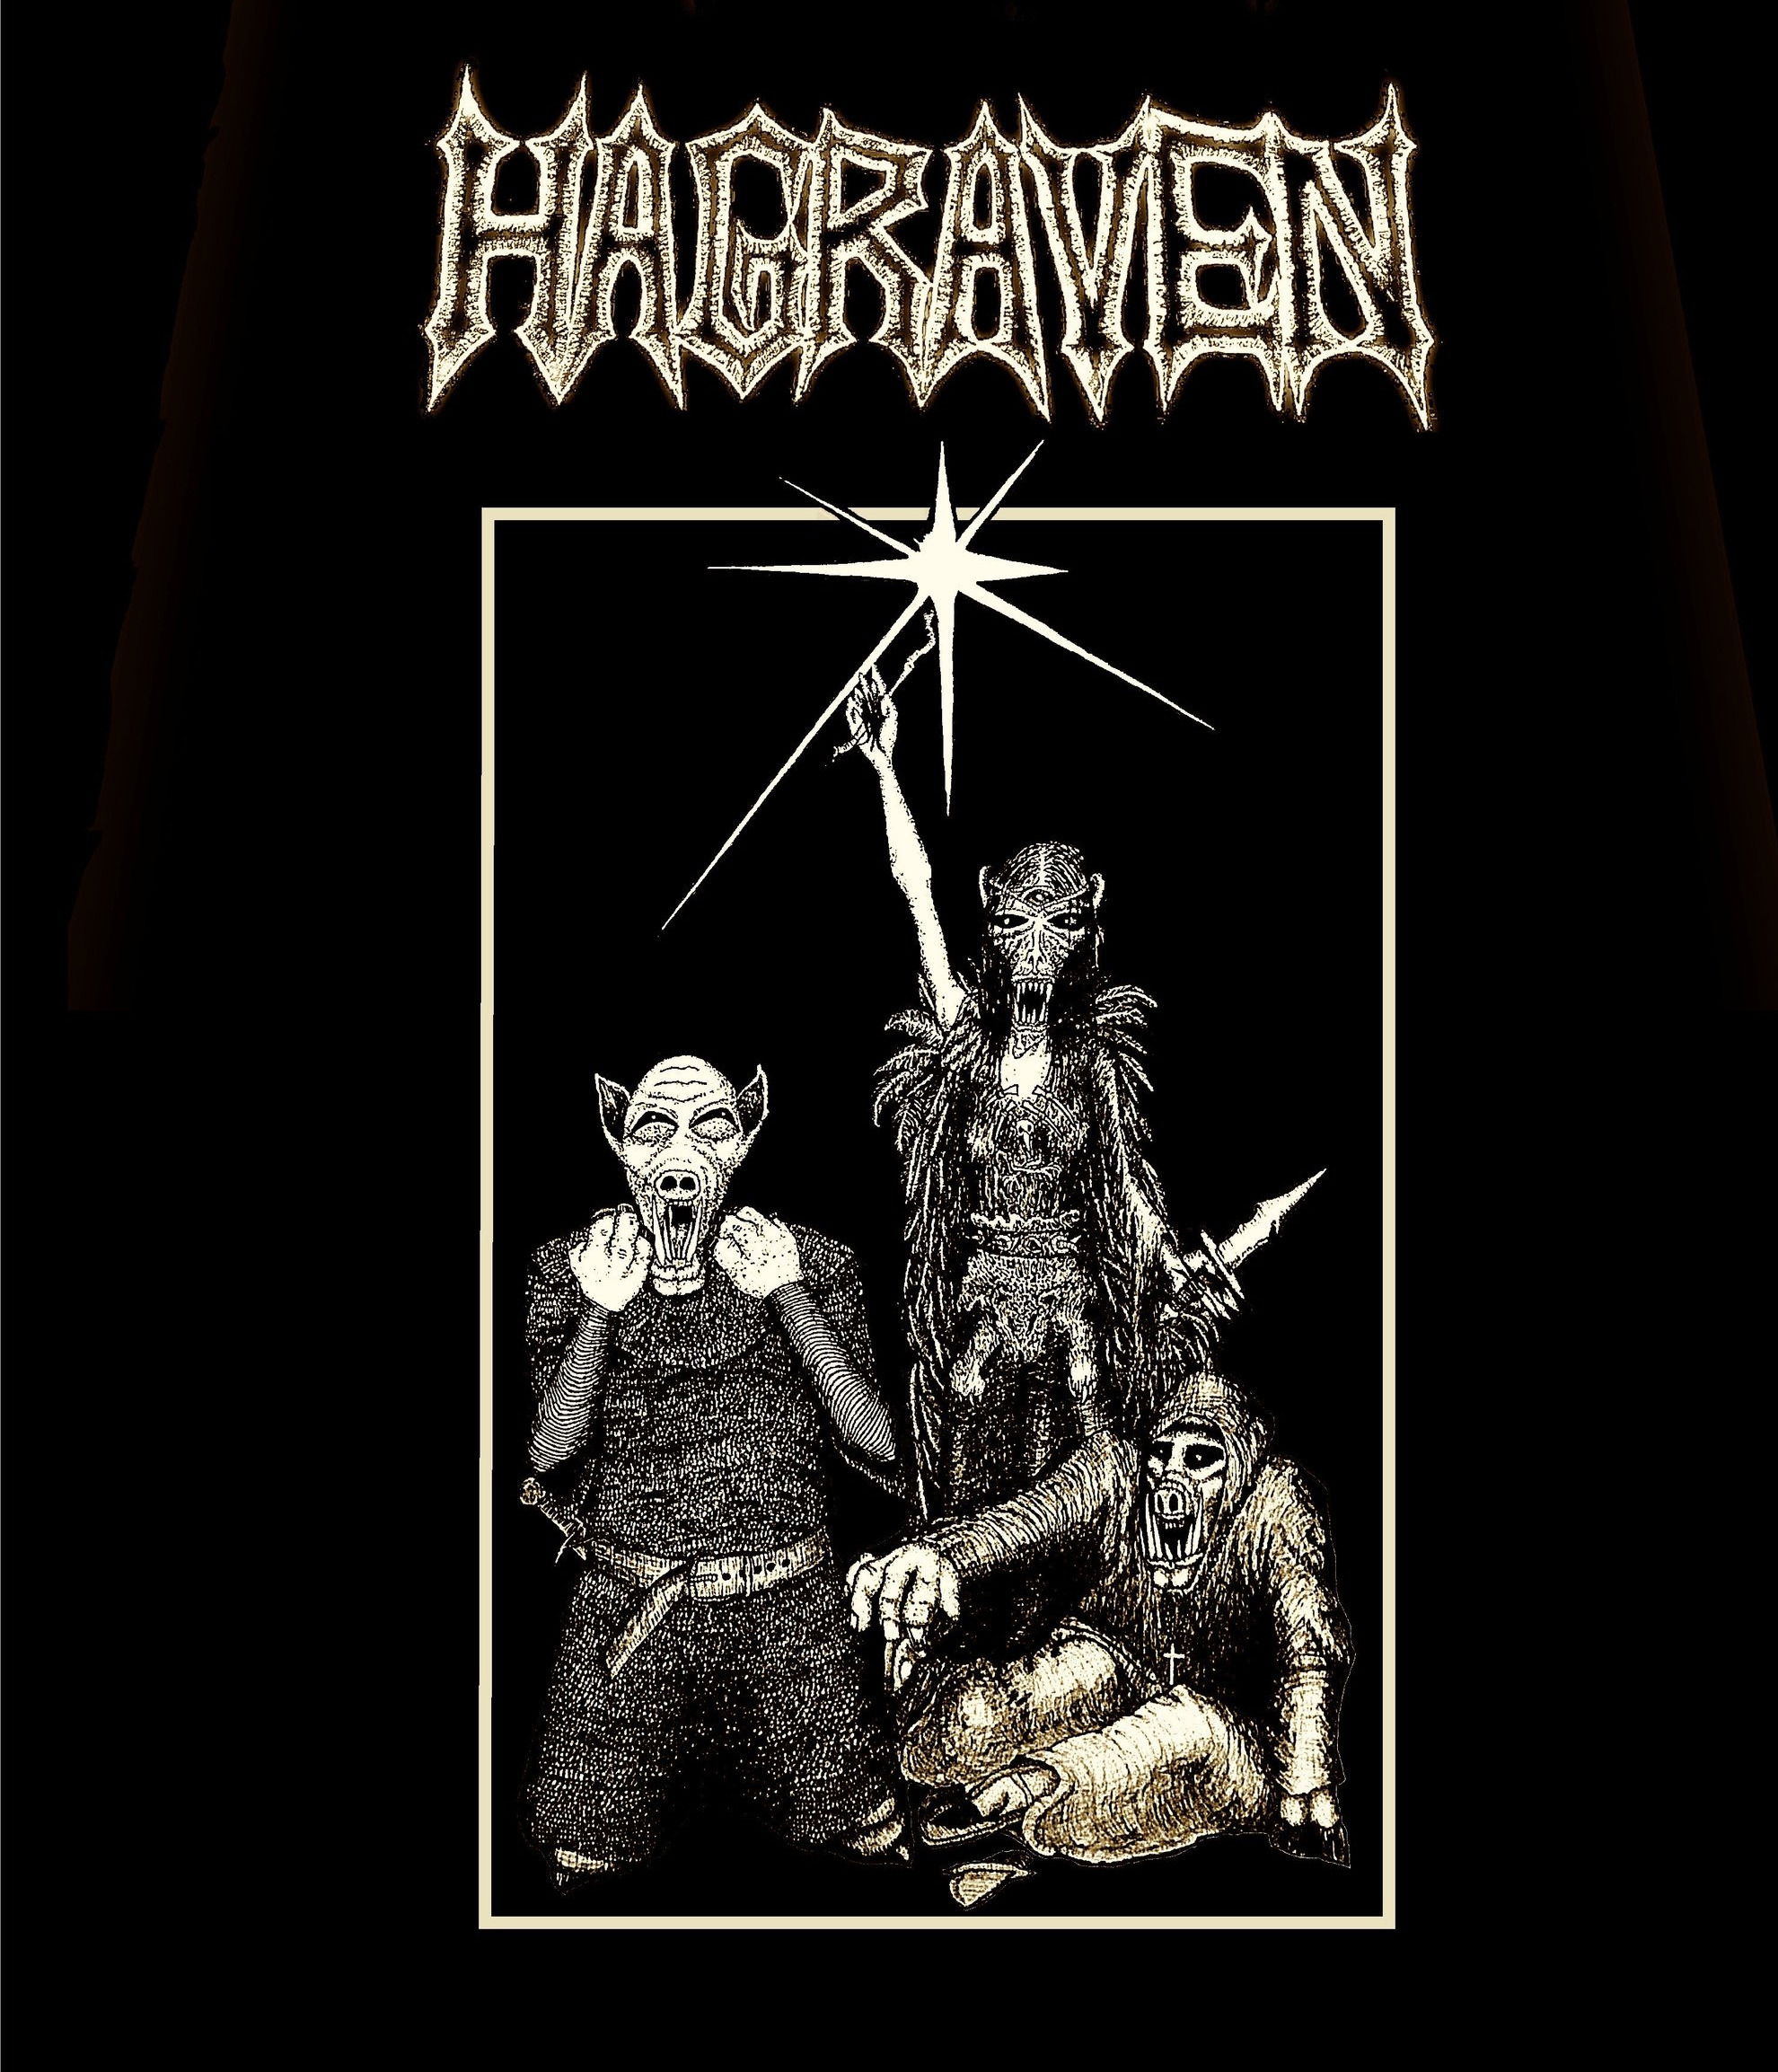 Interview with HAGRAVEN